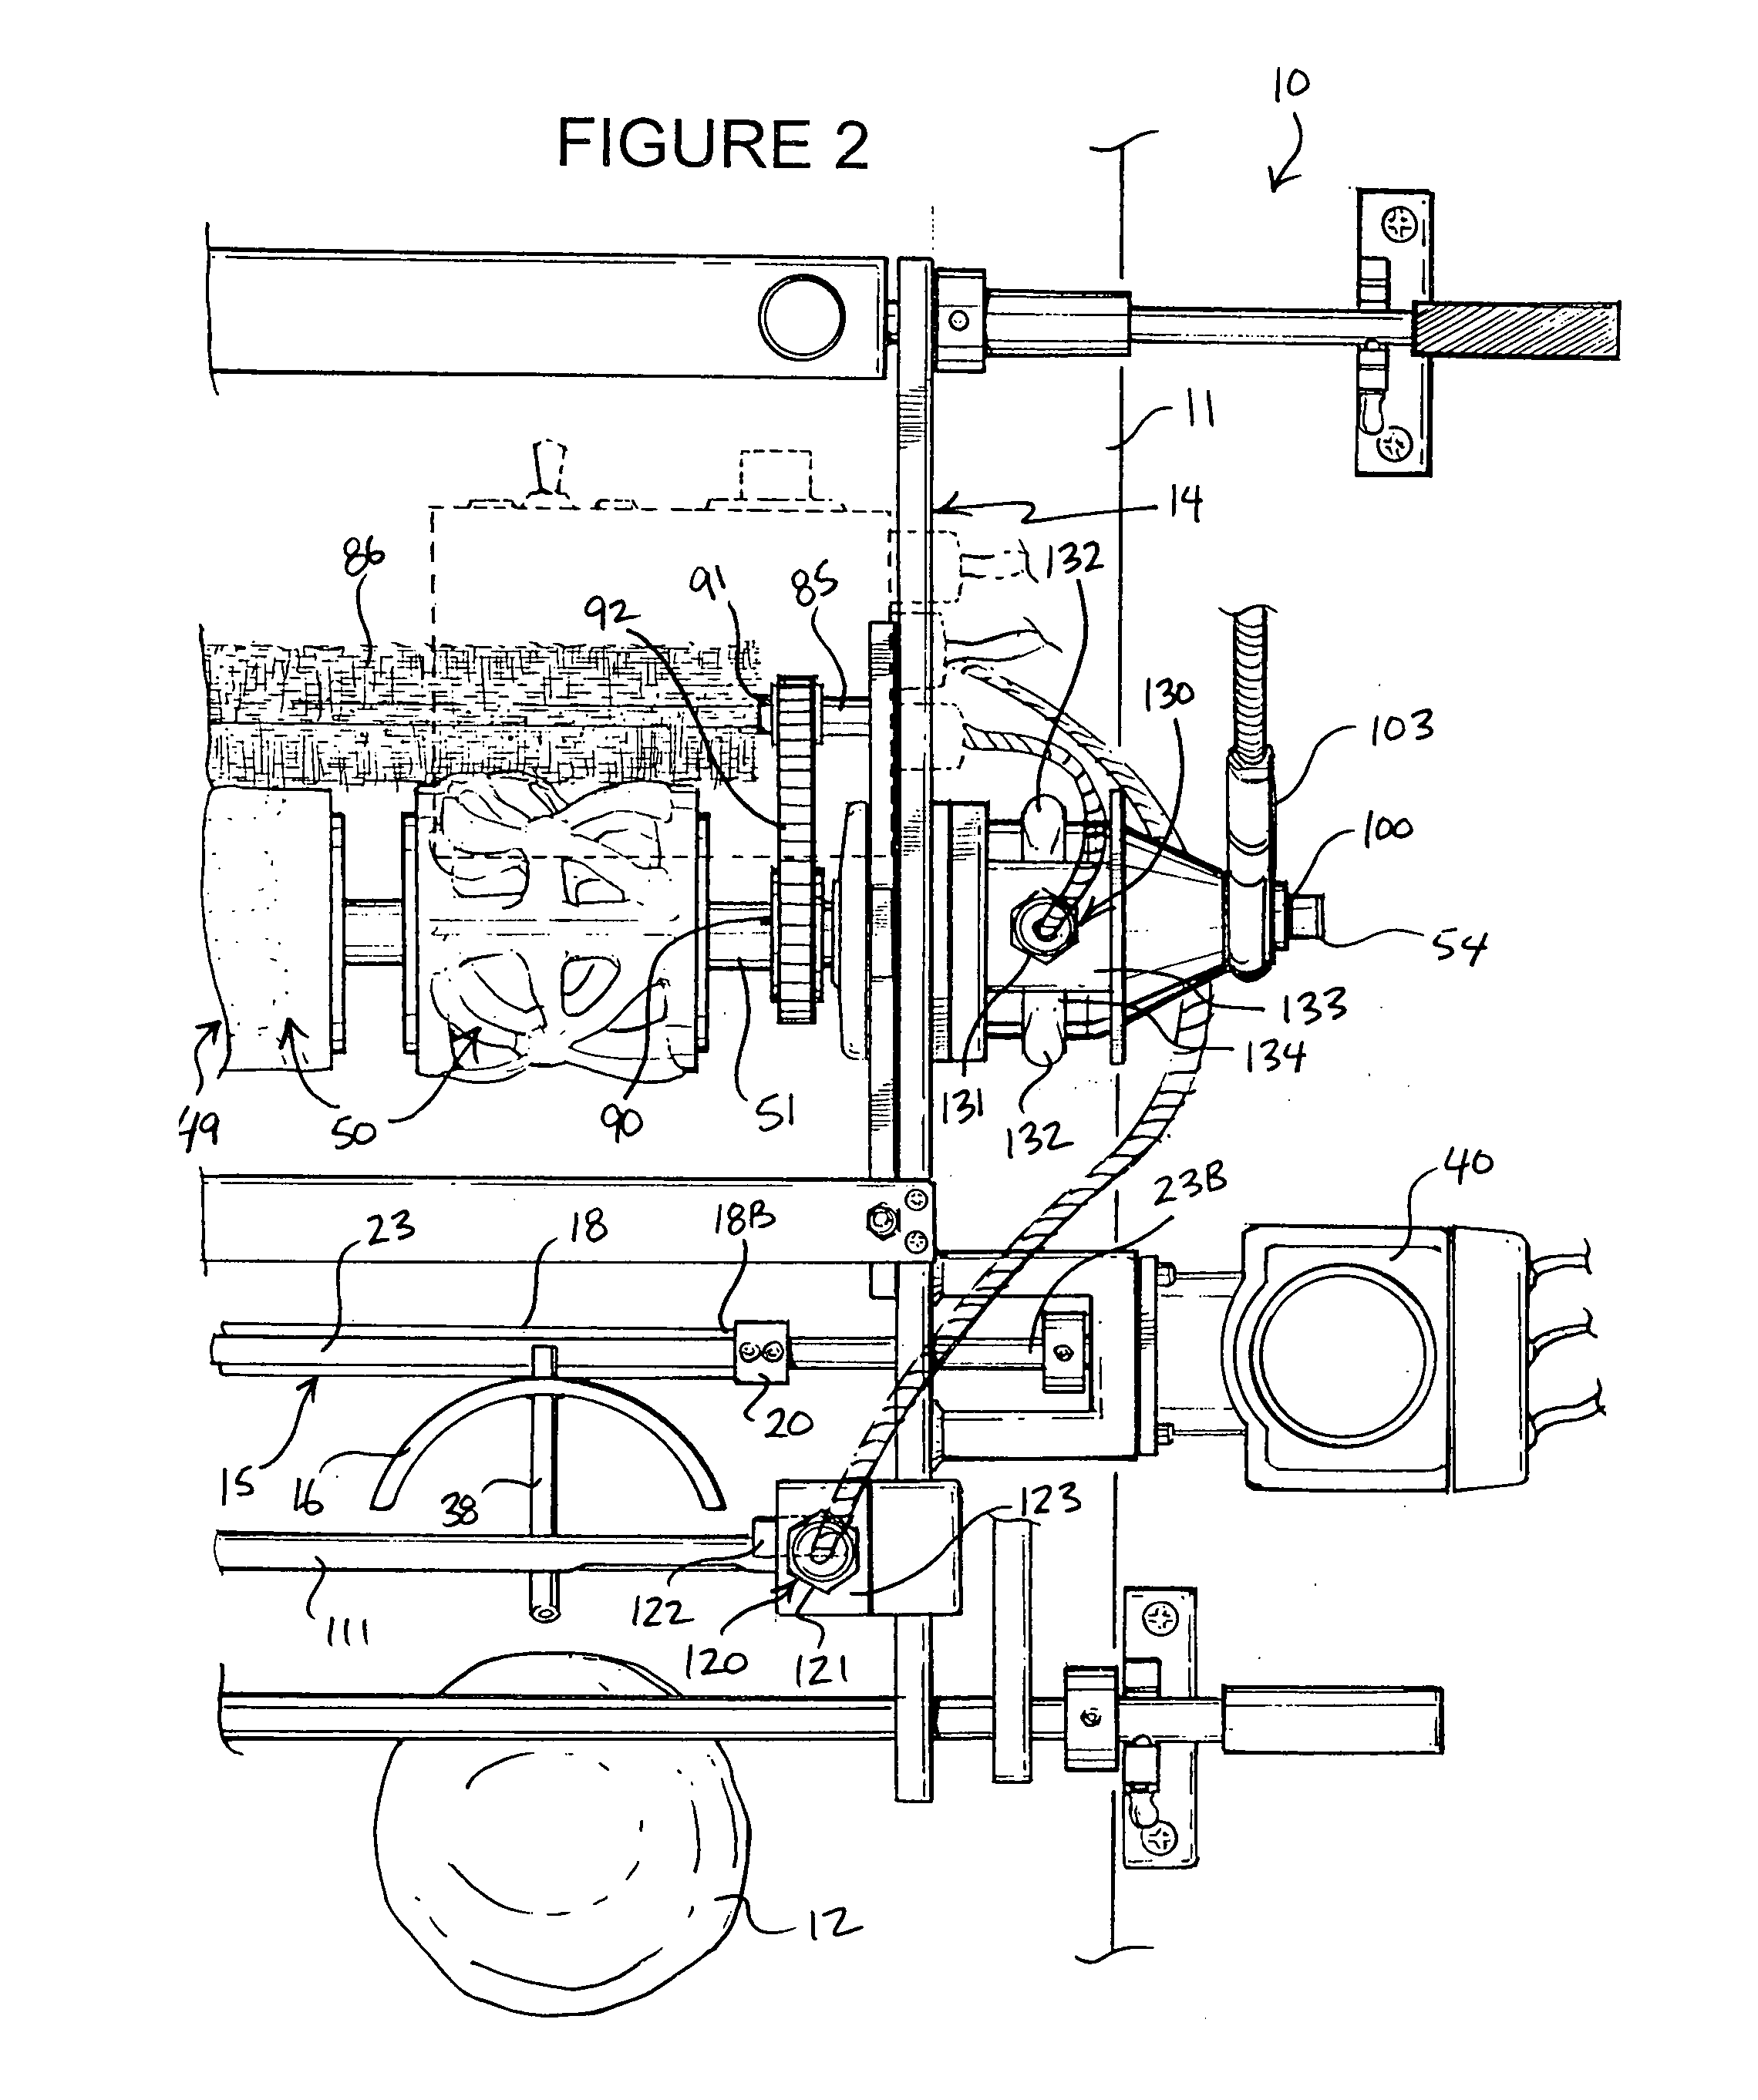 Roll-forming apparatus